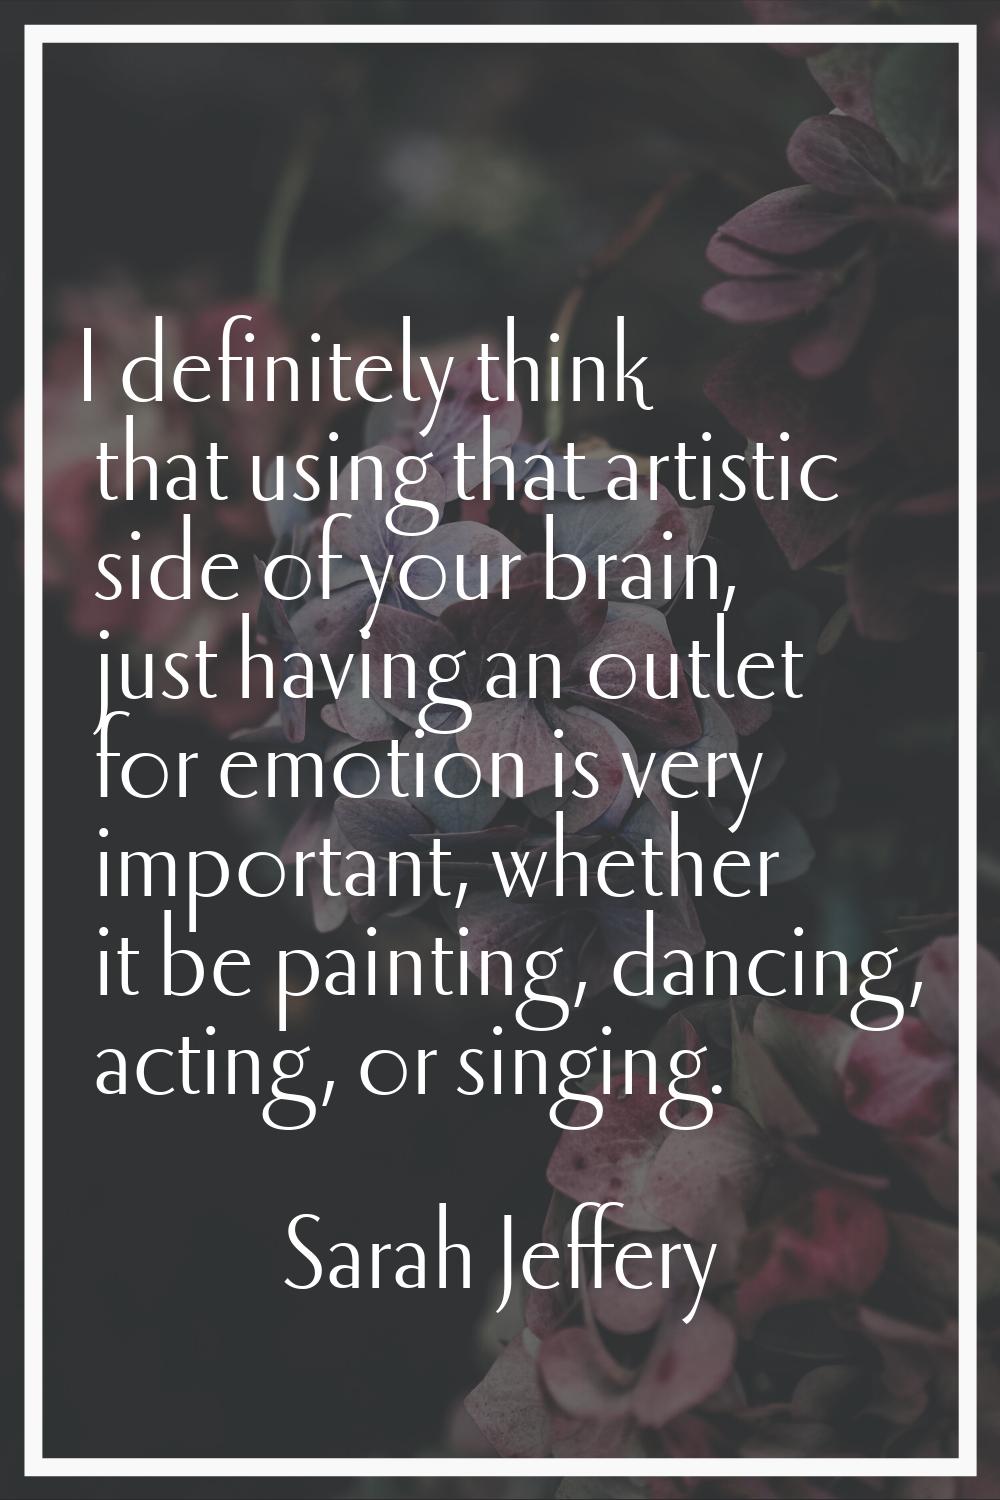 I definitely think that using that artistic side of your brain, just having an outlet for emotion i